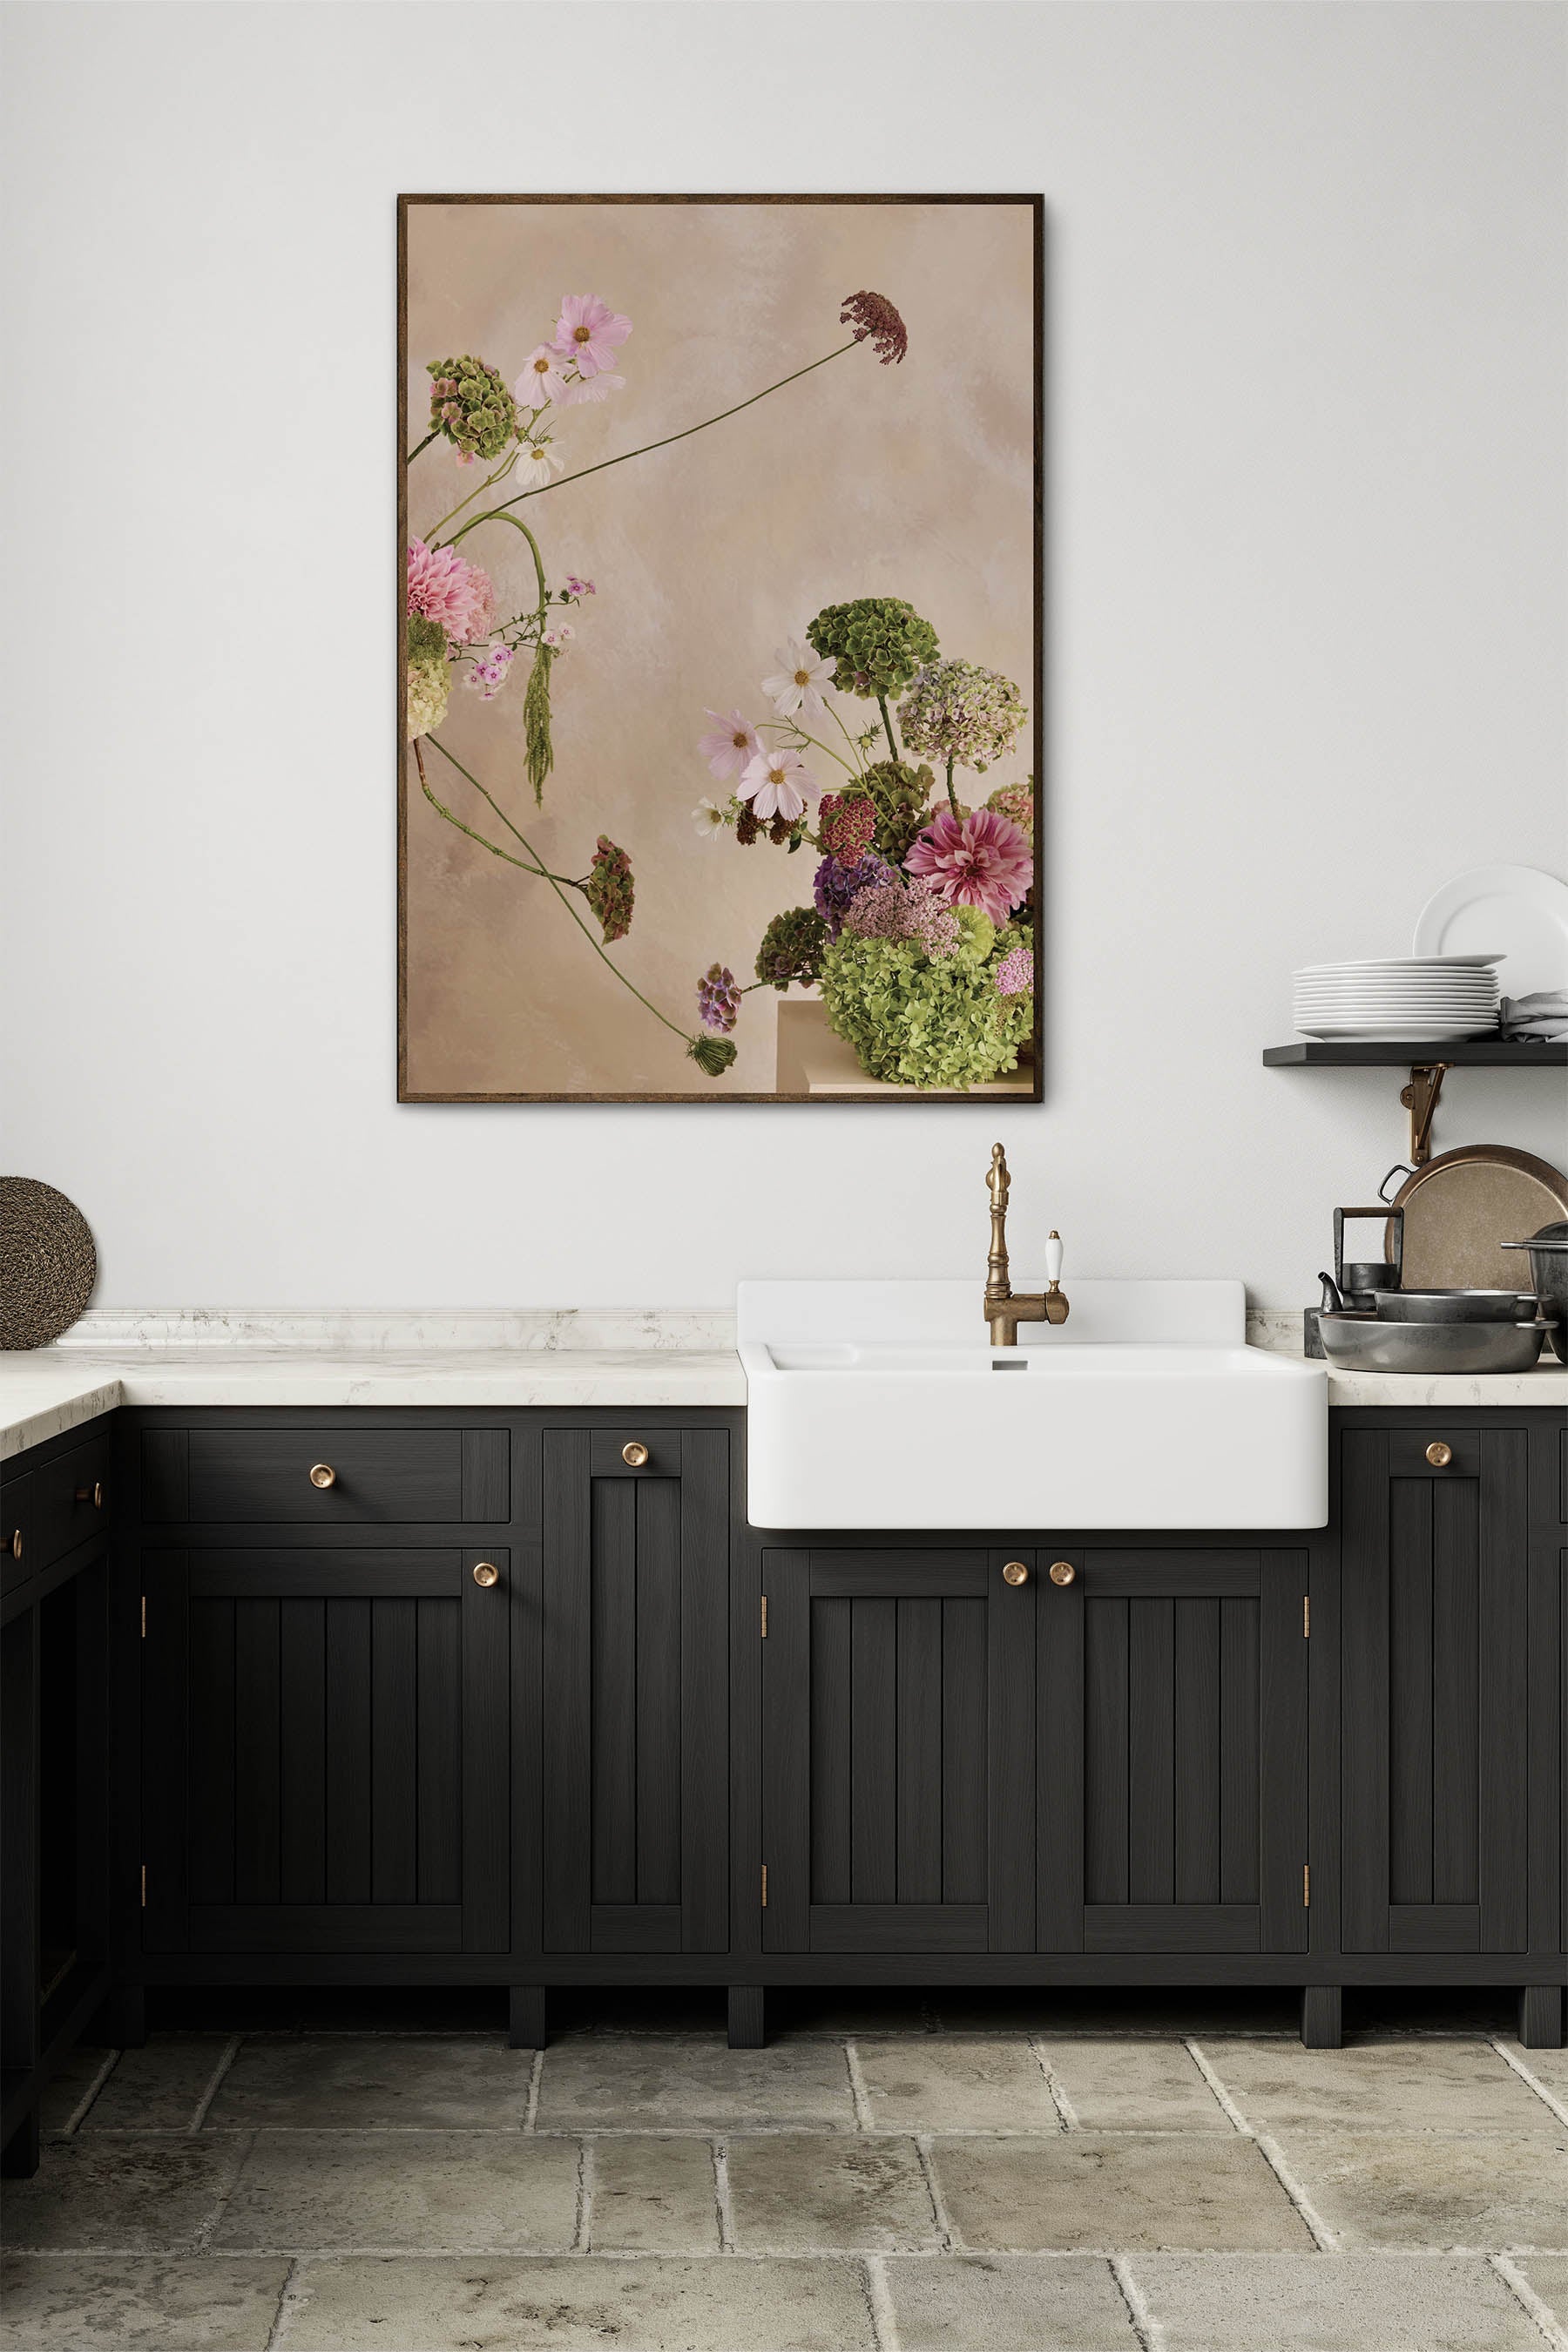 Whimsical Floral Abstract Arrangement against a Linen colour hand painted background Fine Art Print By Austin Bloom Styled in a kitchen with dark timber cabinetry and white marble counter top.